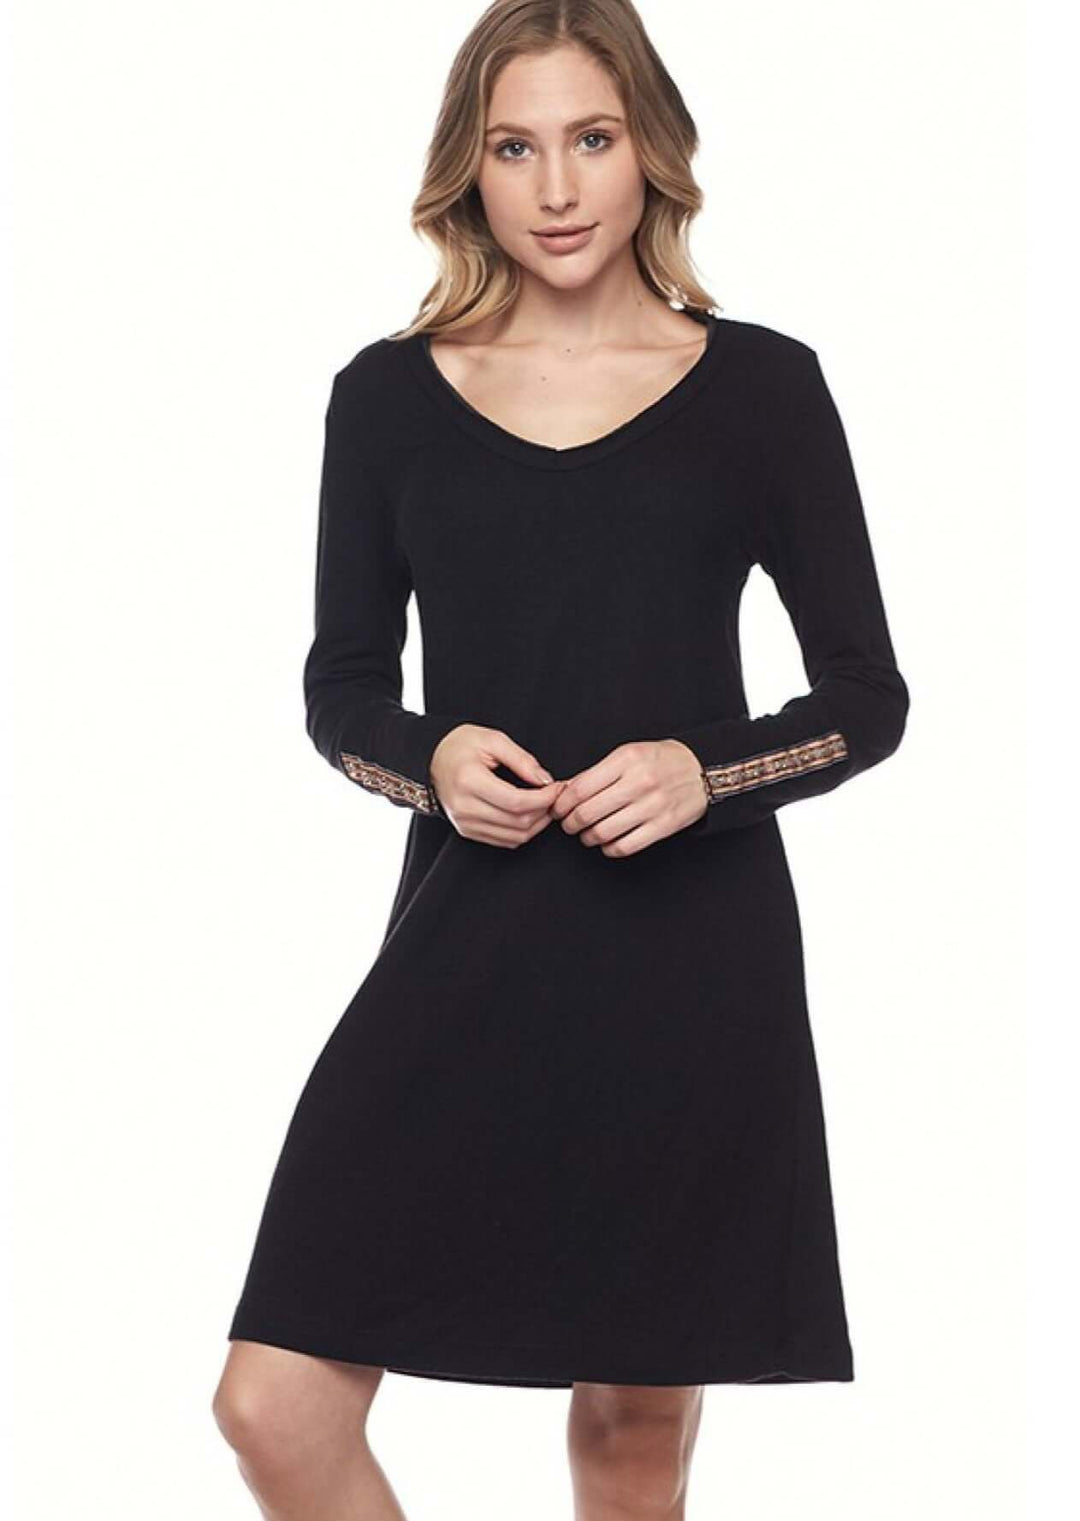 USA Made Ladies Black Casual Double Layered Midi Dress with Cuff Details | Classy Cozy Cool Women's Made in America Clothing Boutique